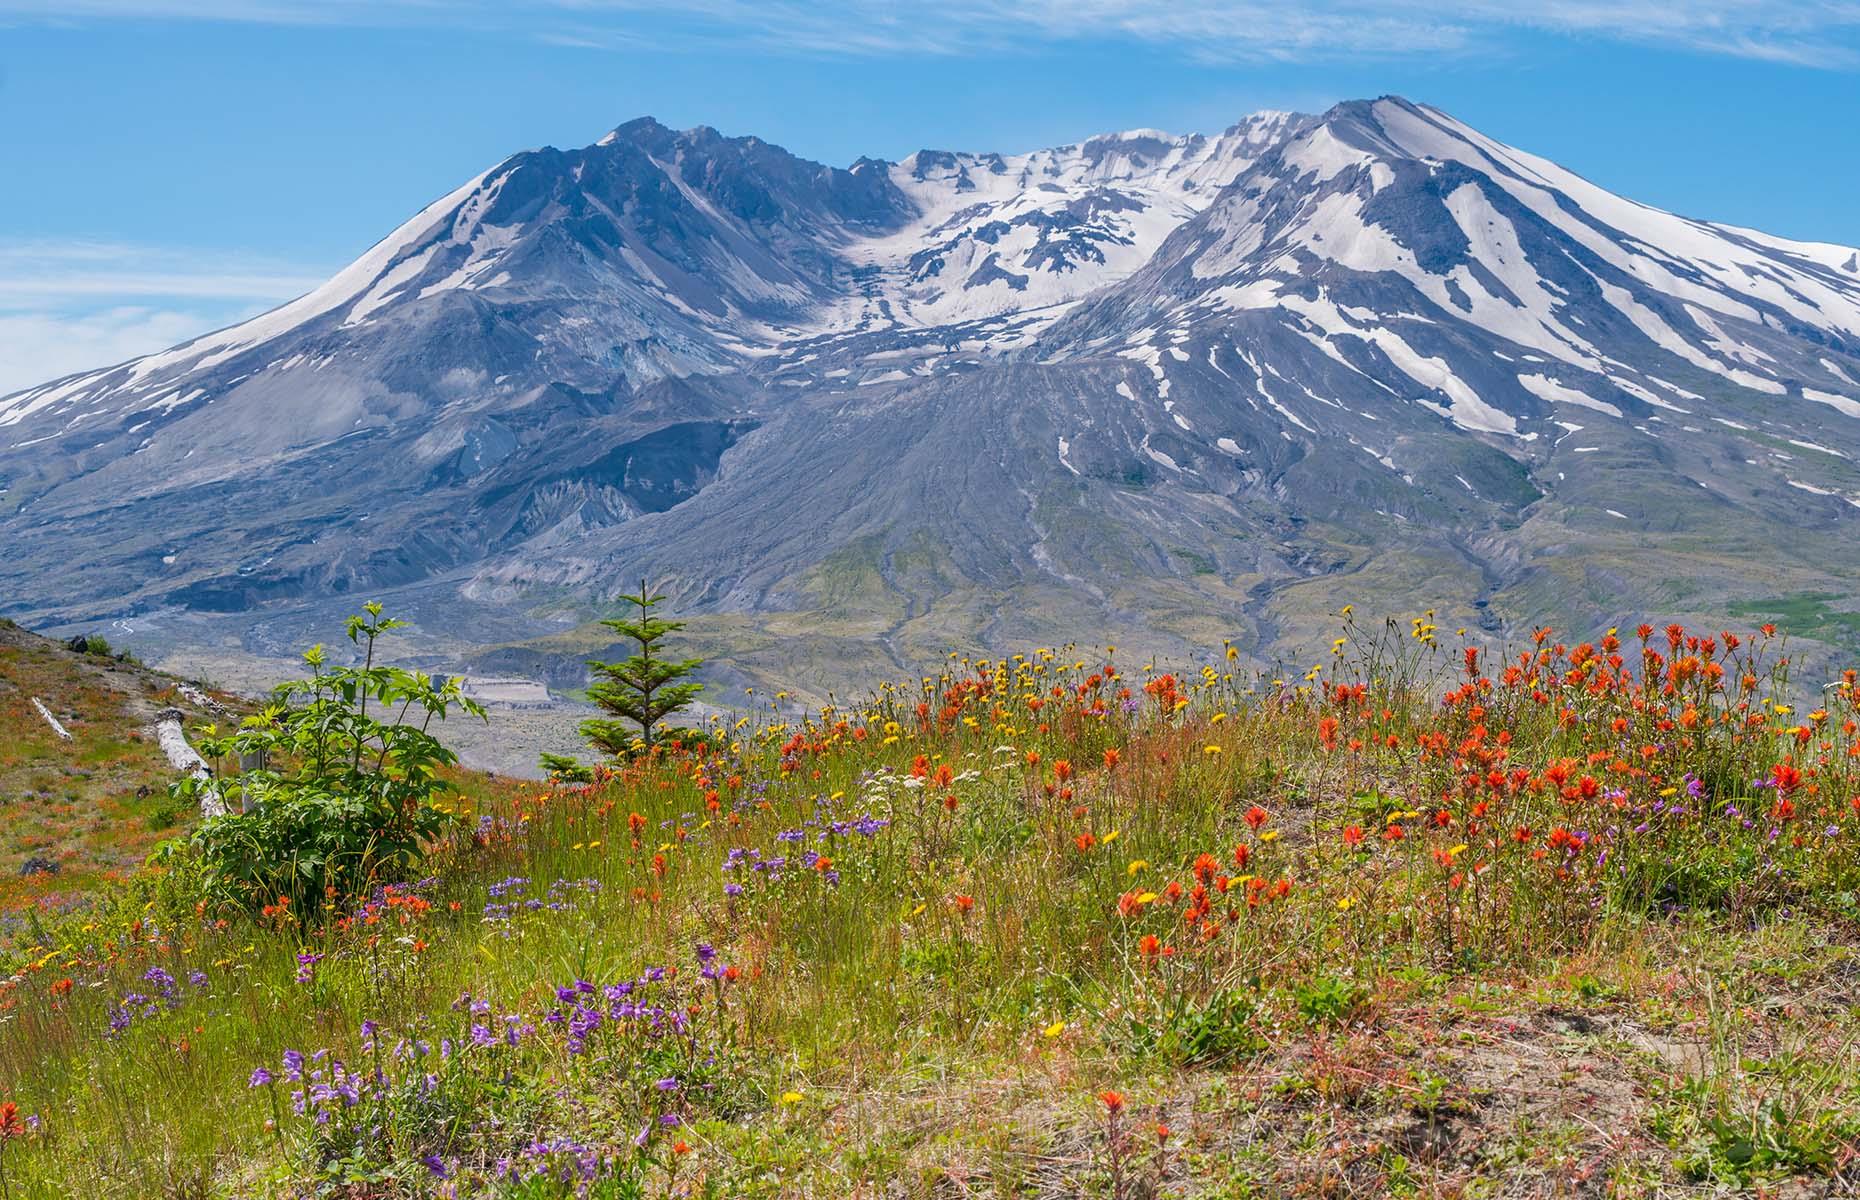 <p>In the Cascade Range in Washington State, Mount St Helens is infamous for its 1980 eruption in which 57 people lost their lives. The <a href="https://www.fs.usda.gov/recarea/giffordpinchot/recarea/?recid=34143">Mount St Helens National Volcanic Monument</a> was created to preserve the volcano and constantly monitor it for unusual seismic activity.</p>